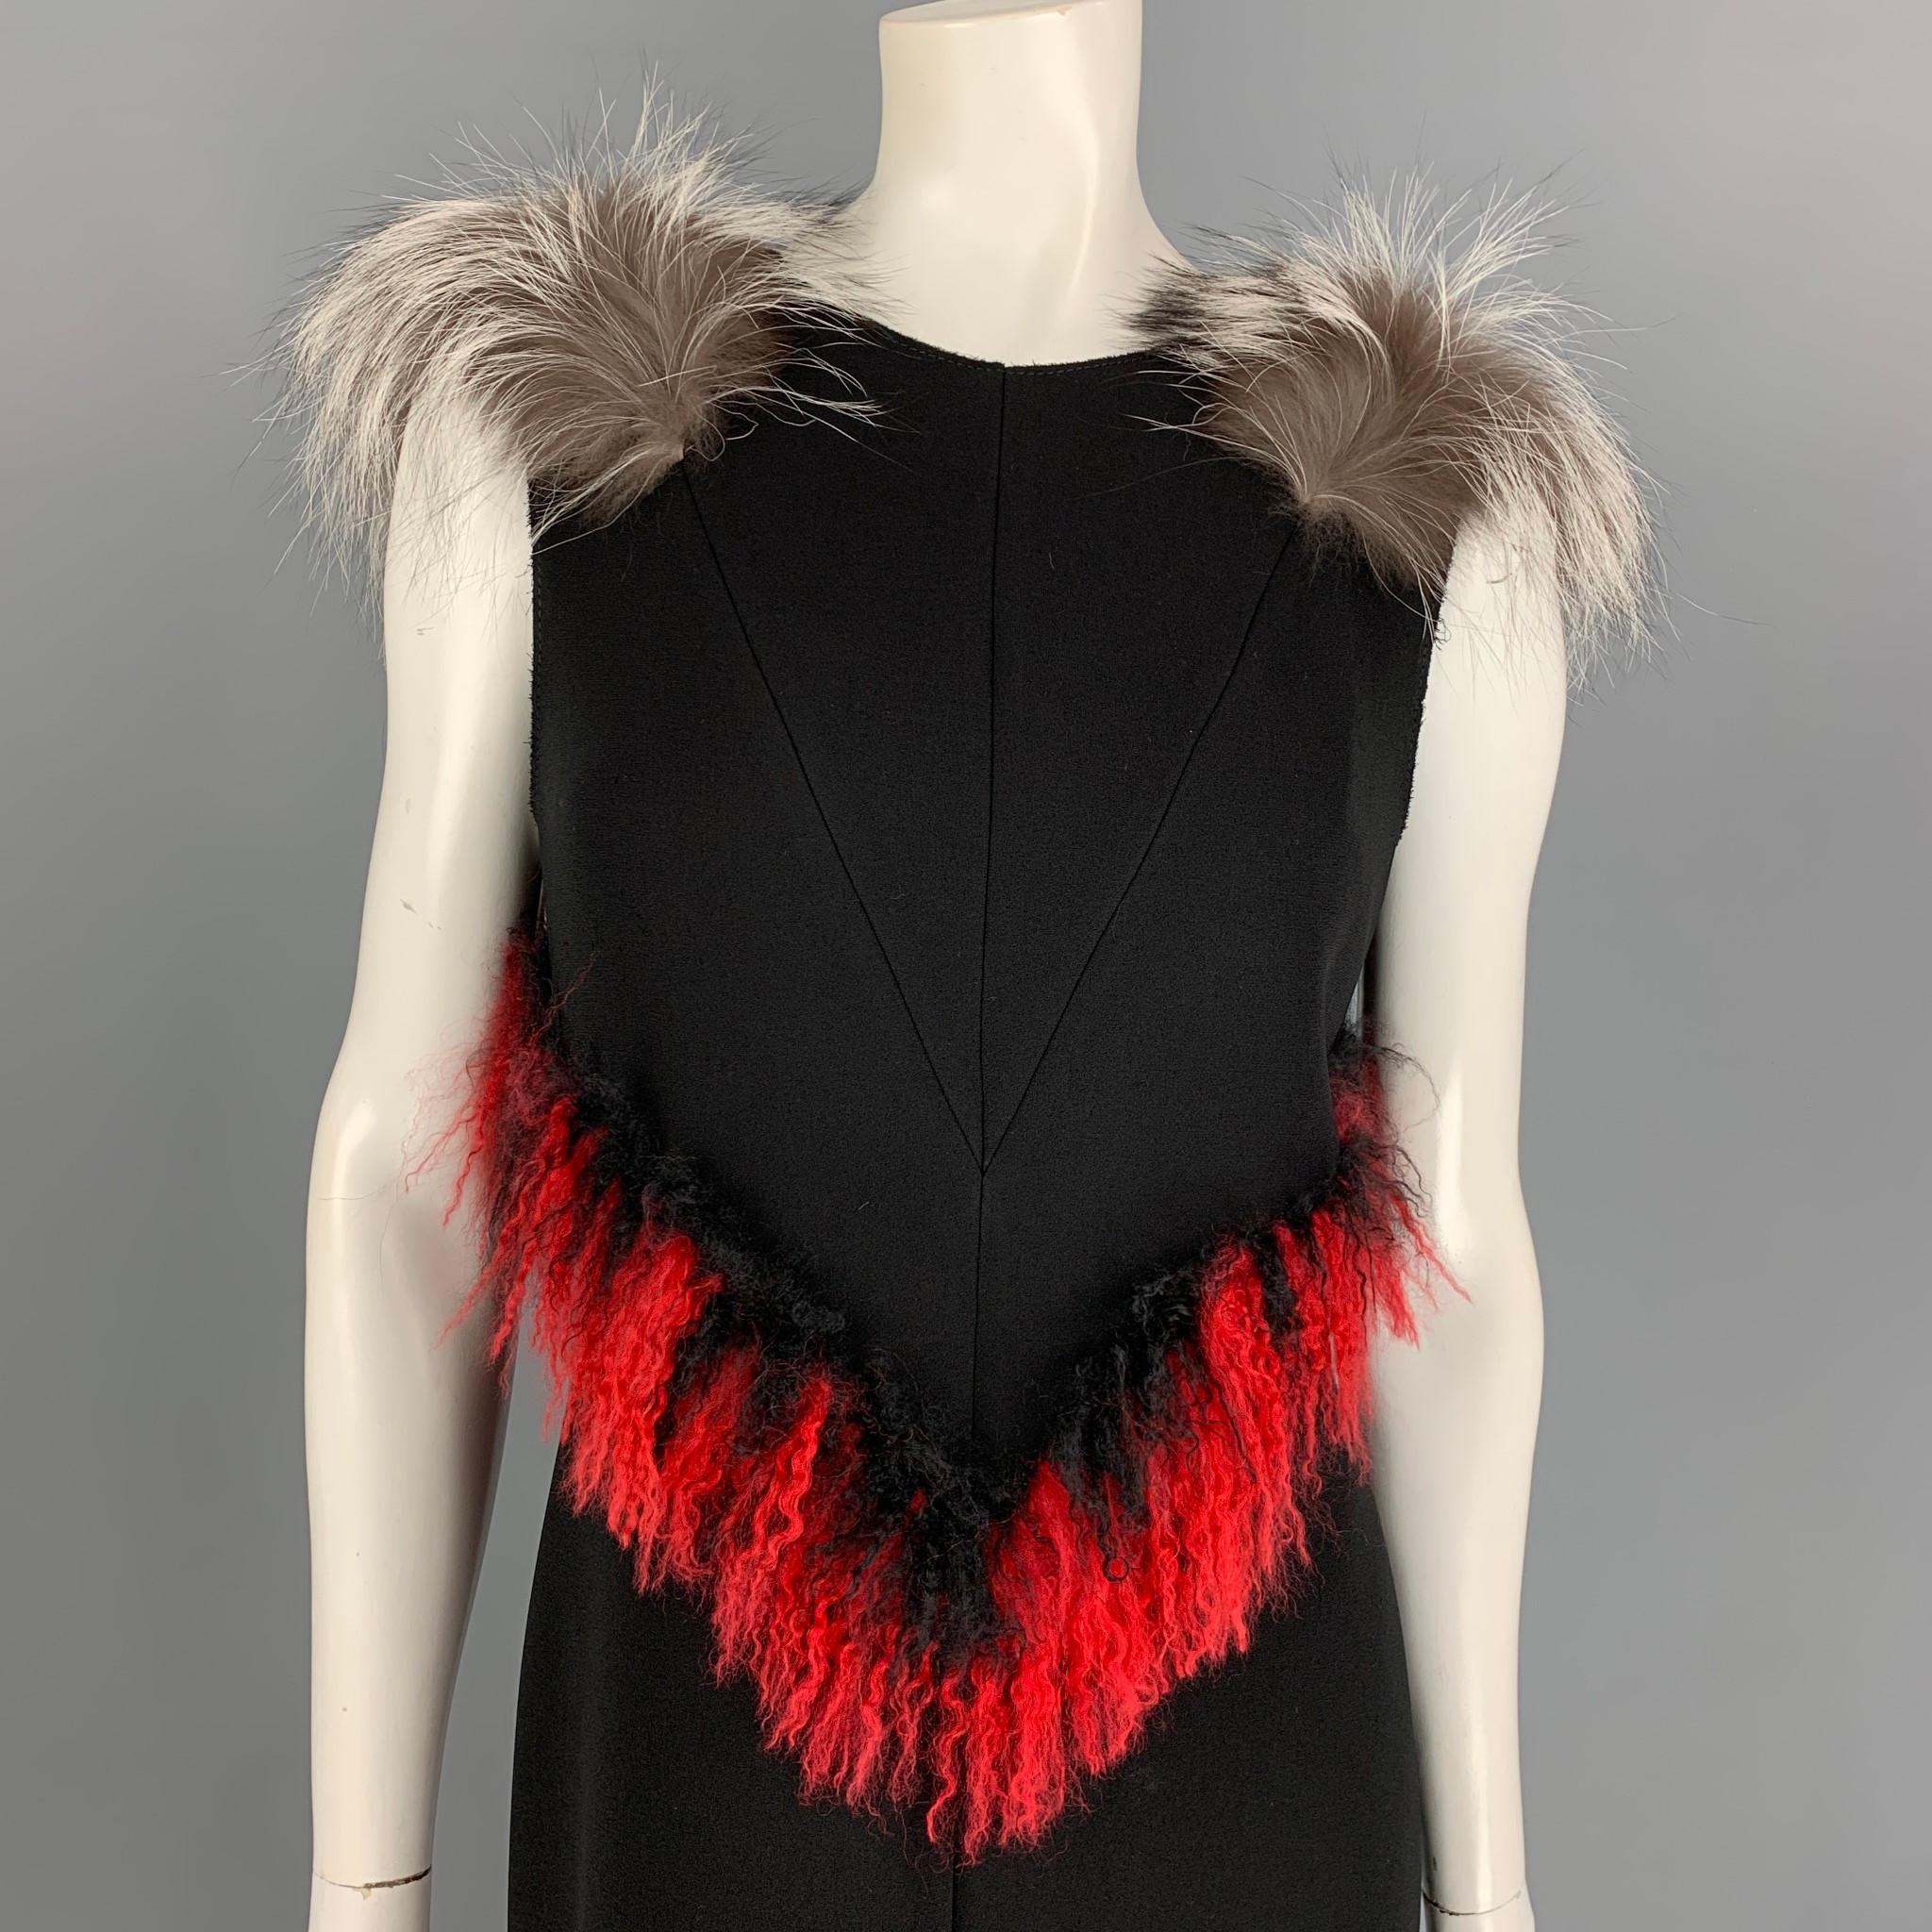 PROENZA SCHOULER cocktail dress comes in a black polyester with a slip liner featuring a sheath style, red lamb fur trim, fox trim, sleeveless, side slits, and a back zip up closure. Made in USA. As seen on Kylie Jenner.

Excellent Pre-Owned